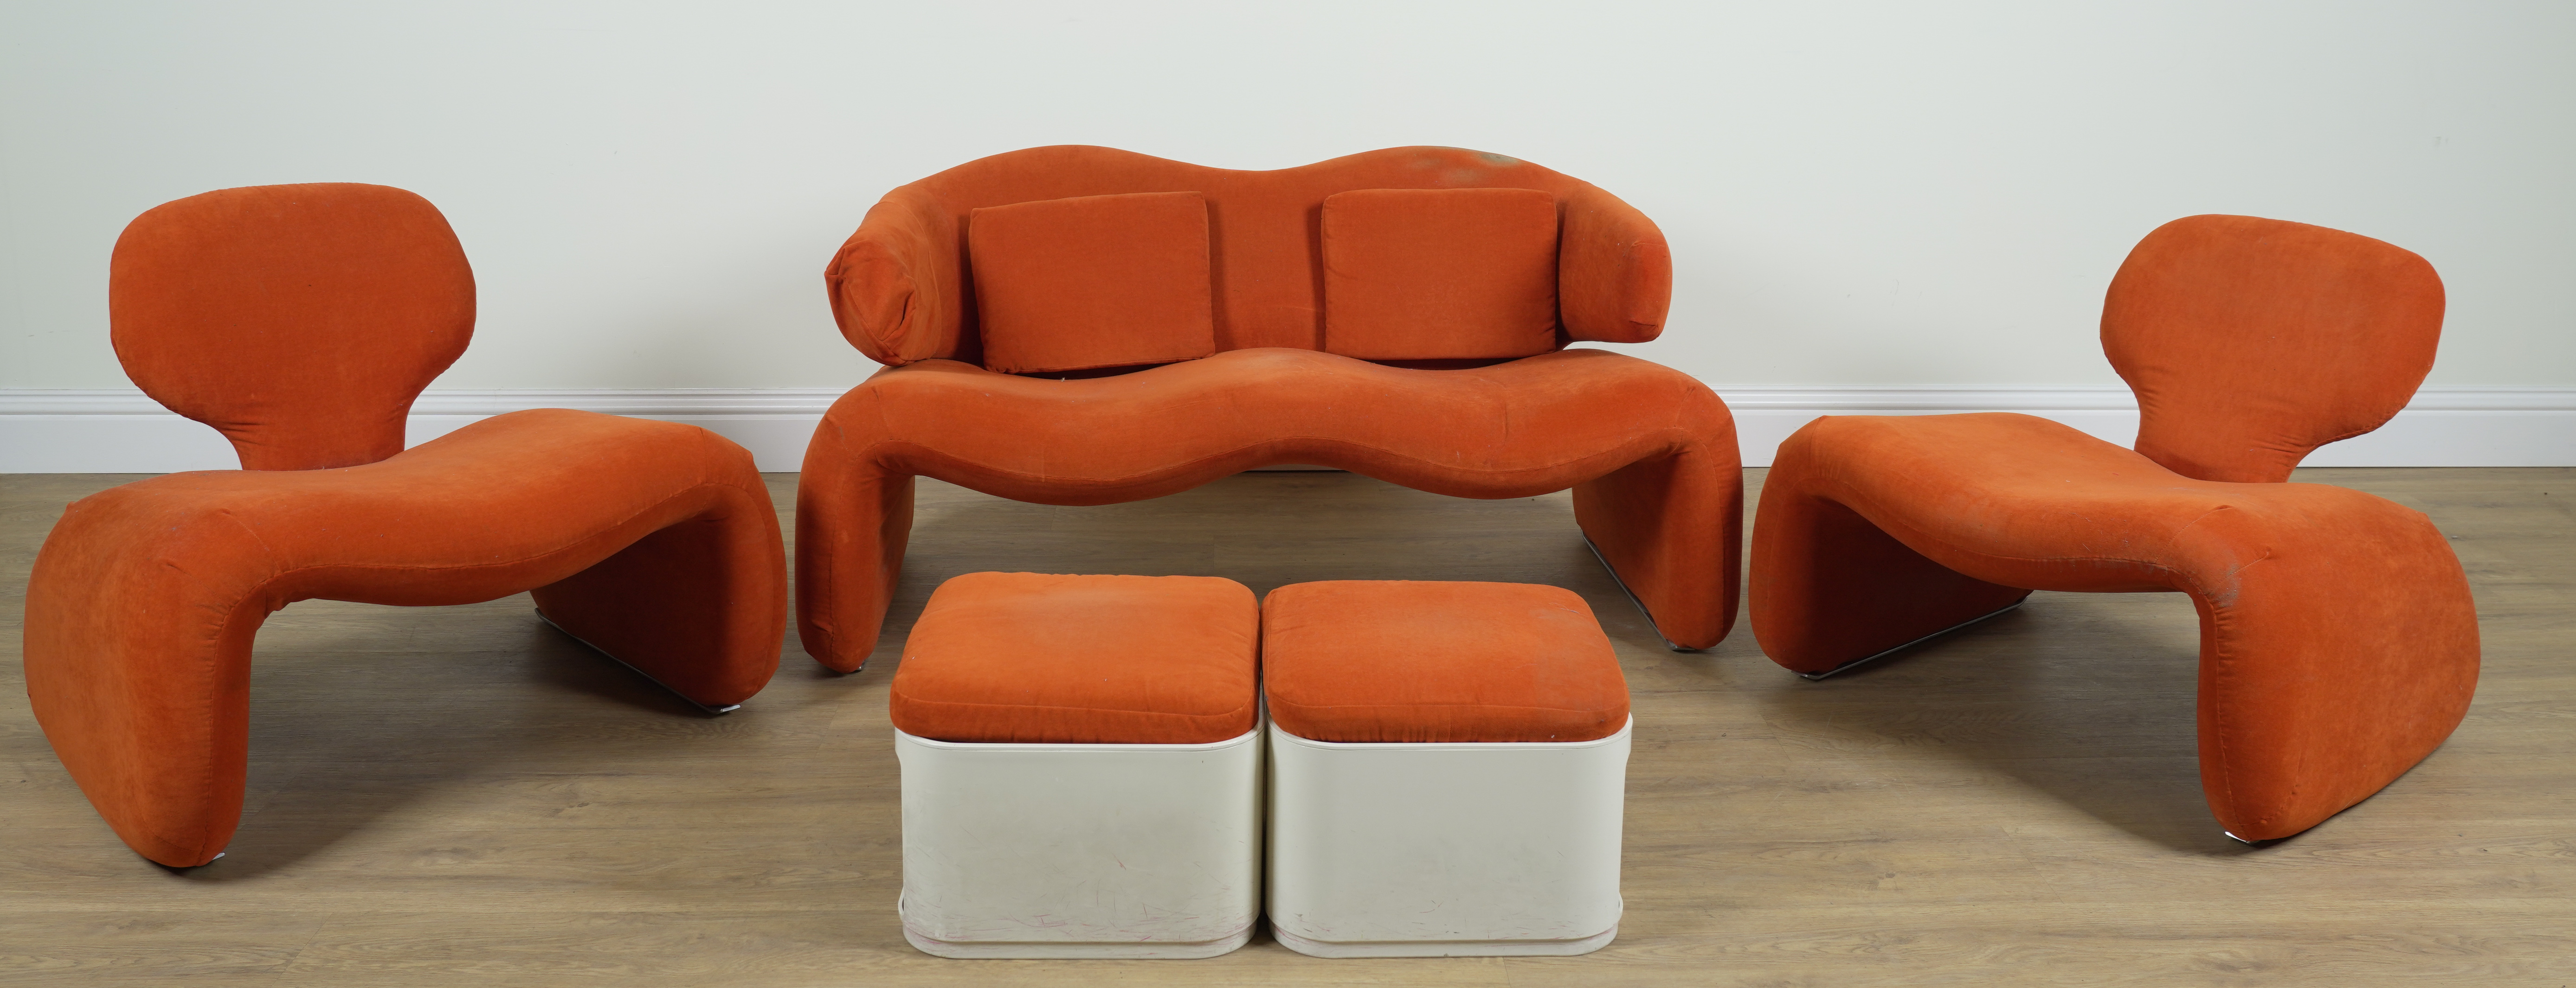 PROBABLY OLIVIER MOURGUE; AN ORANGE UPHOLSTERED SOFA AND CHAIRS (5)